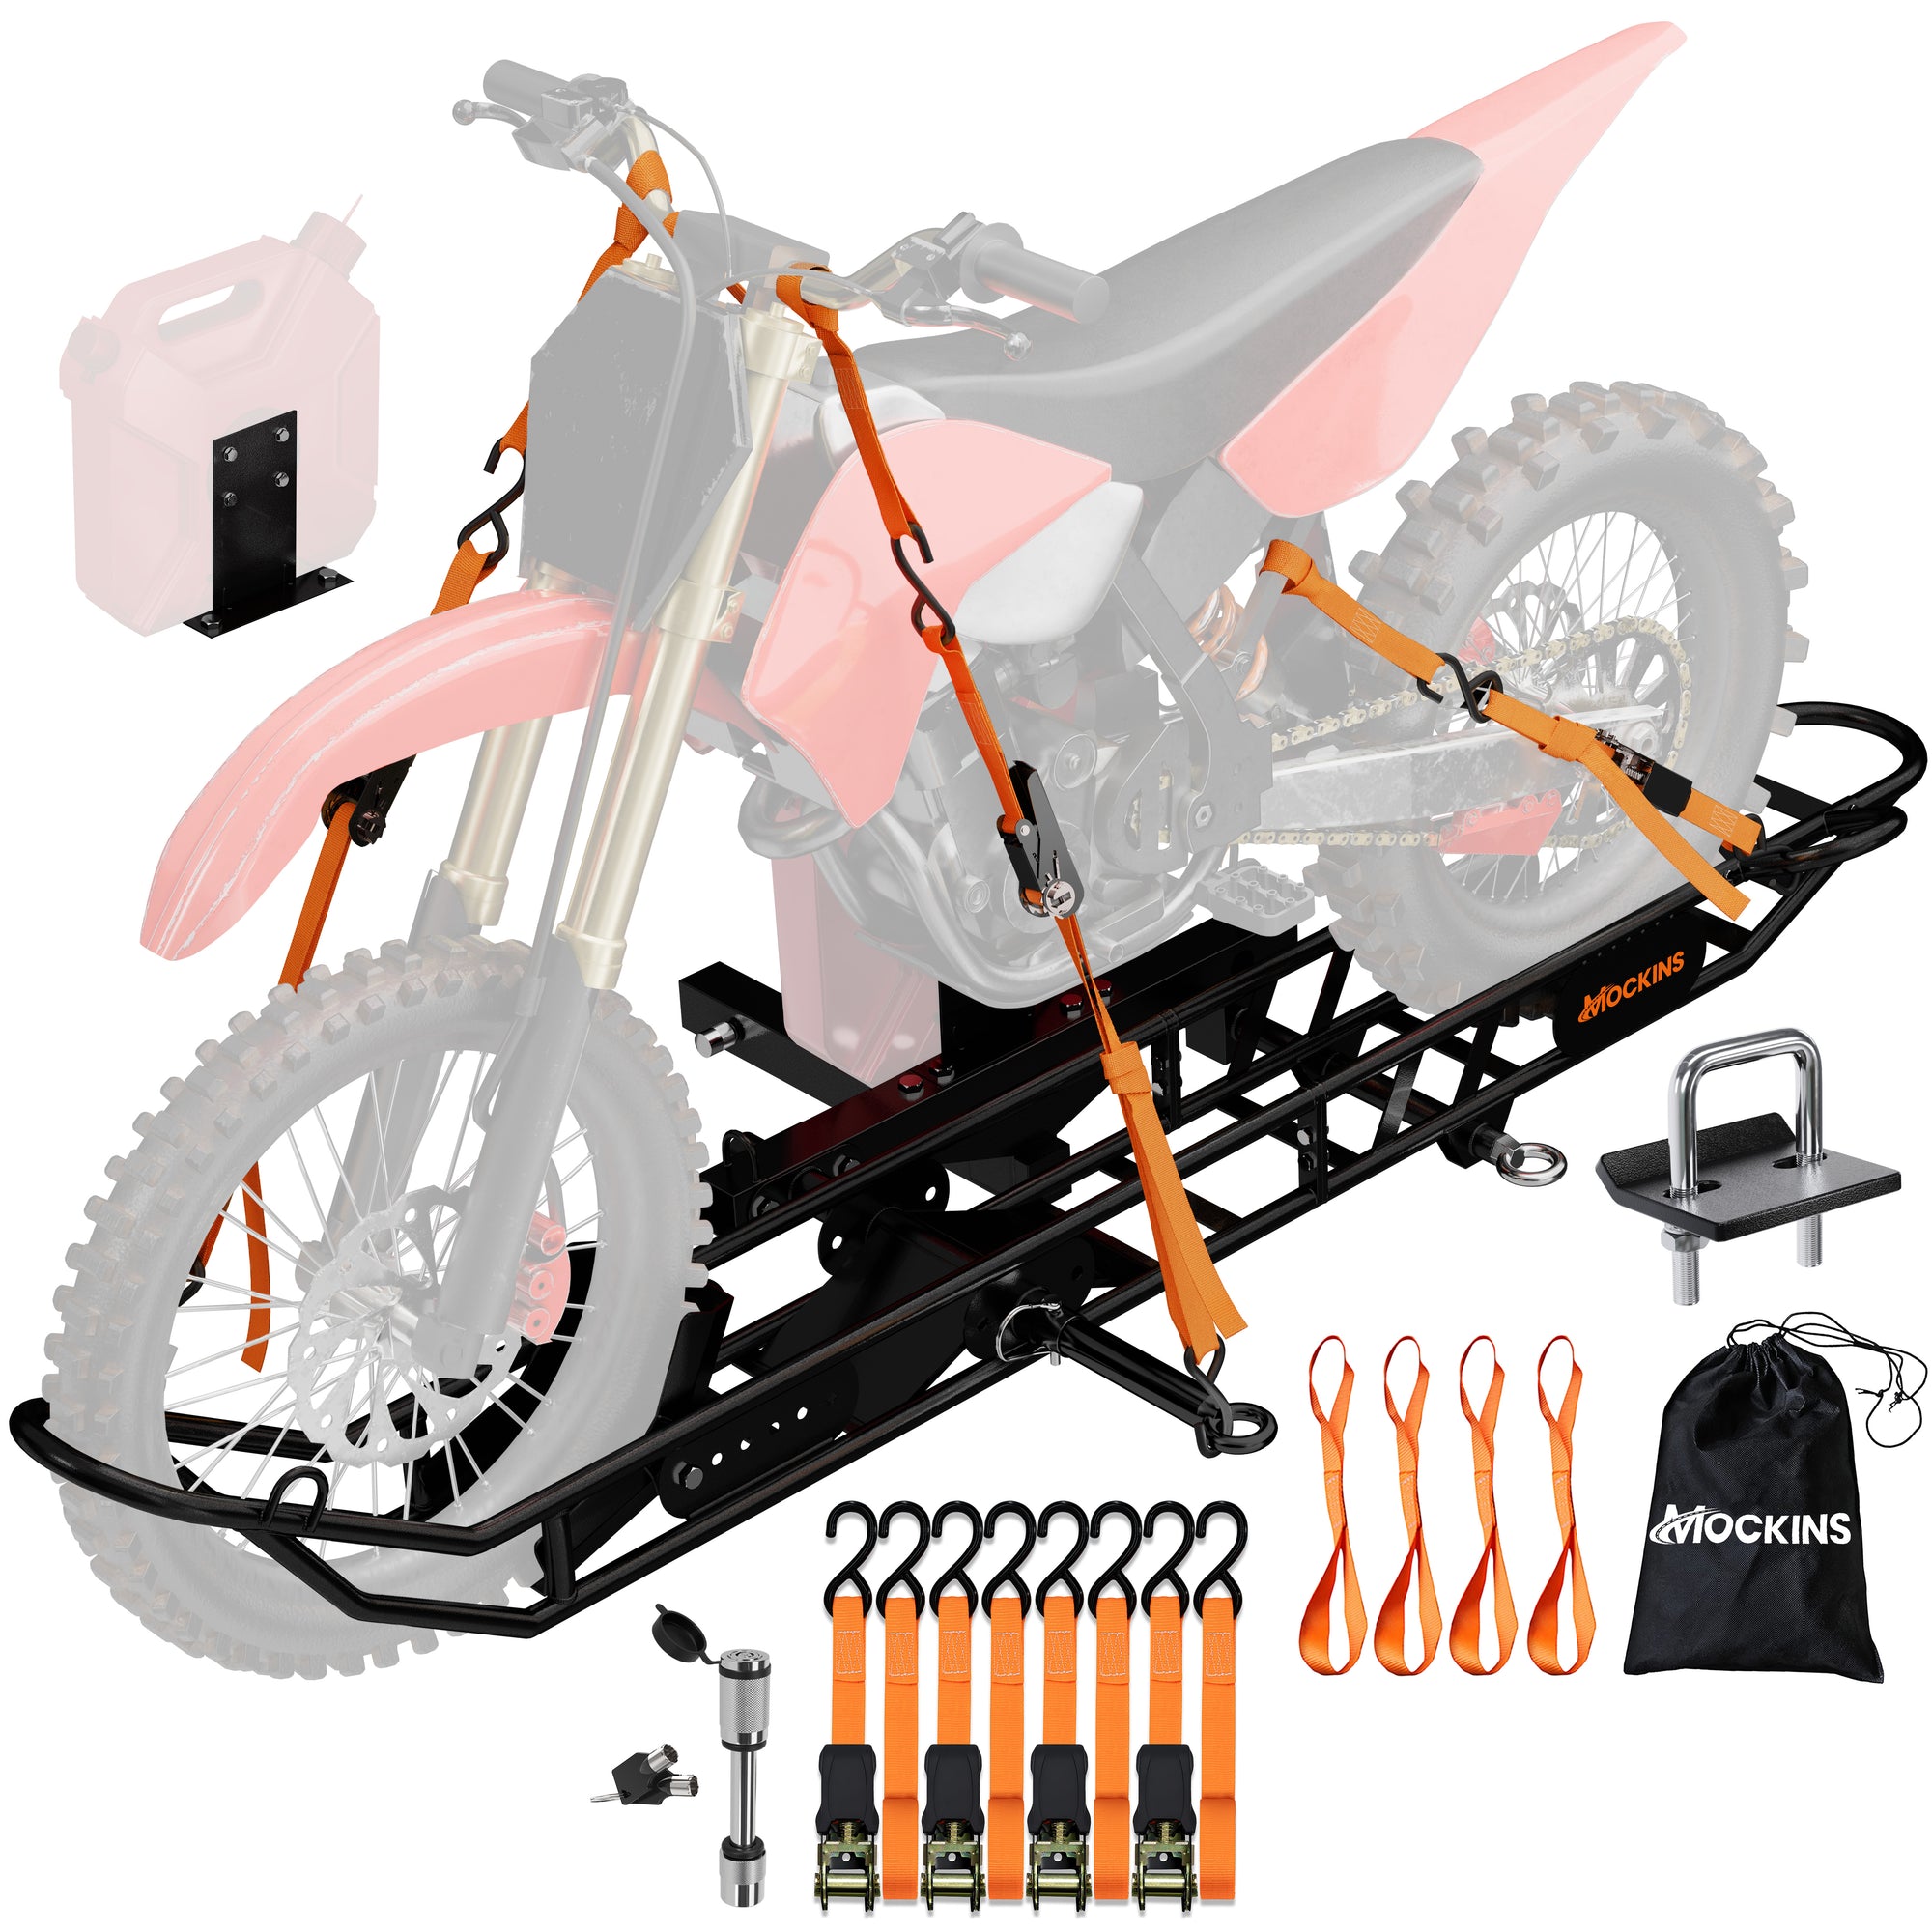 Ramp-Free Dirt Bike Hitch Hauler - Tilting Design for Easy One-Person Loading - Gas Can Attachment